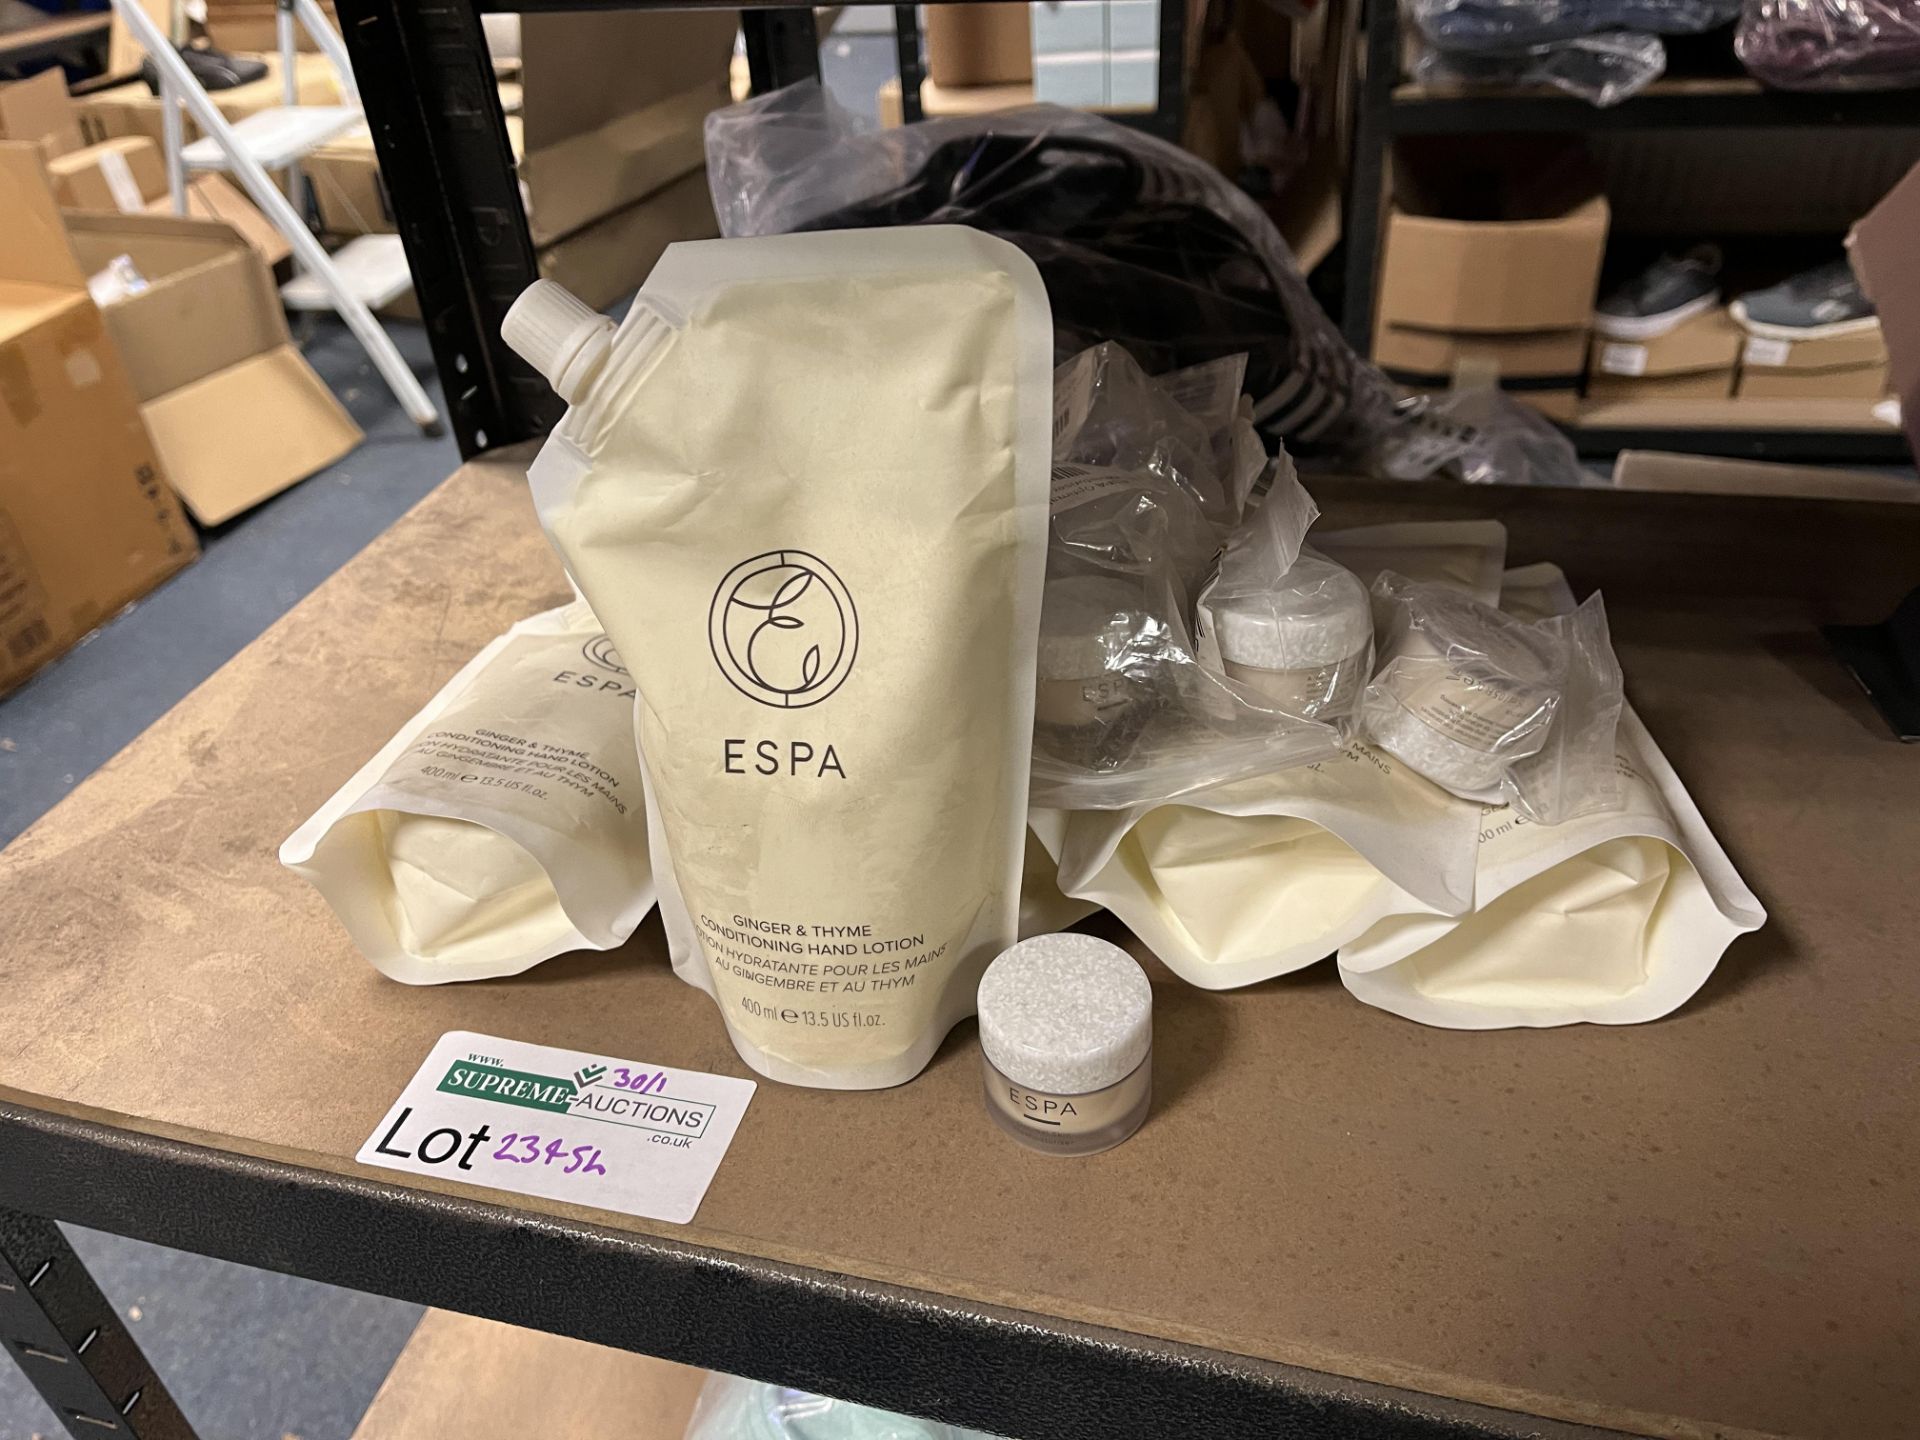 12 PIECE MIXED NEW ESPA LOT TO CONTAIN CONDITIONING HAND LOTION & OPTIMAL SKIN PRO MOISTURISER (